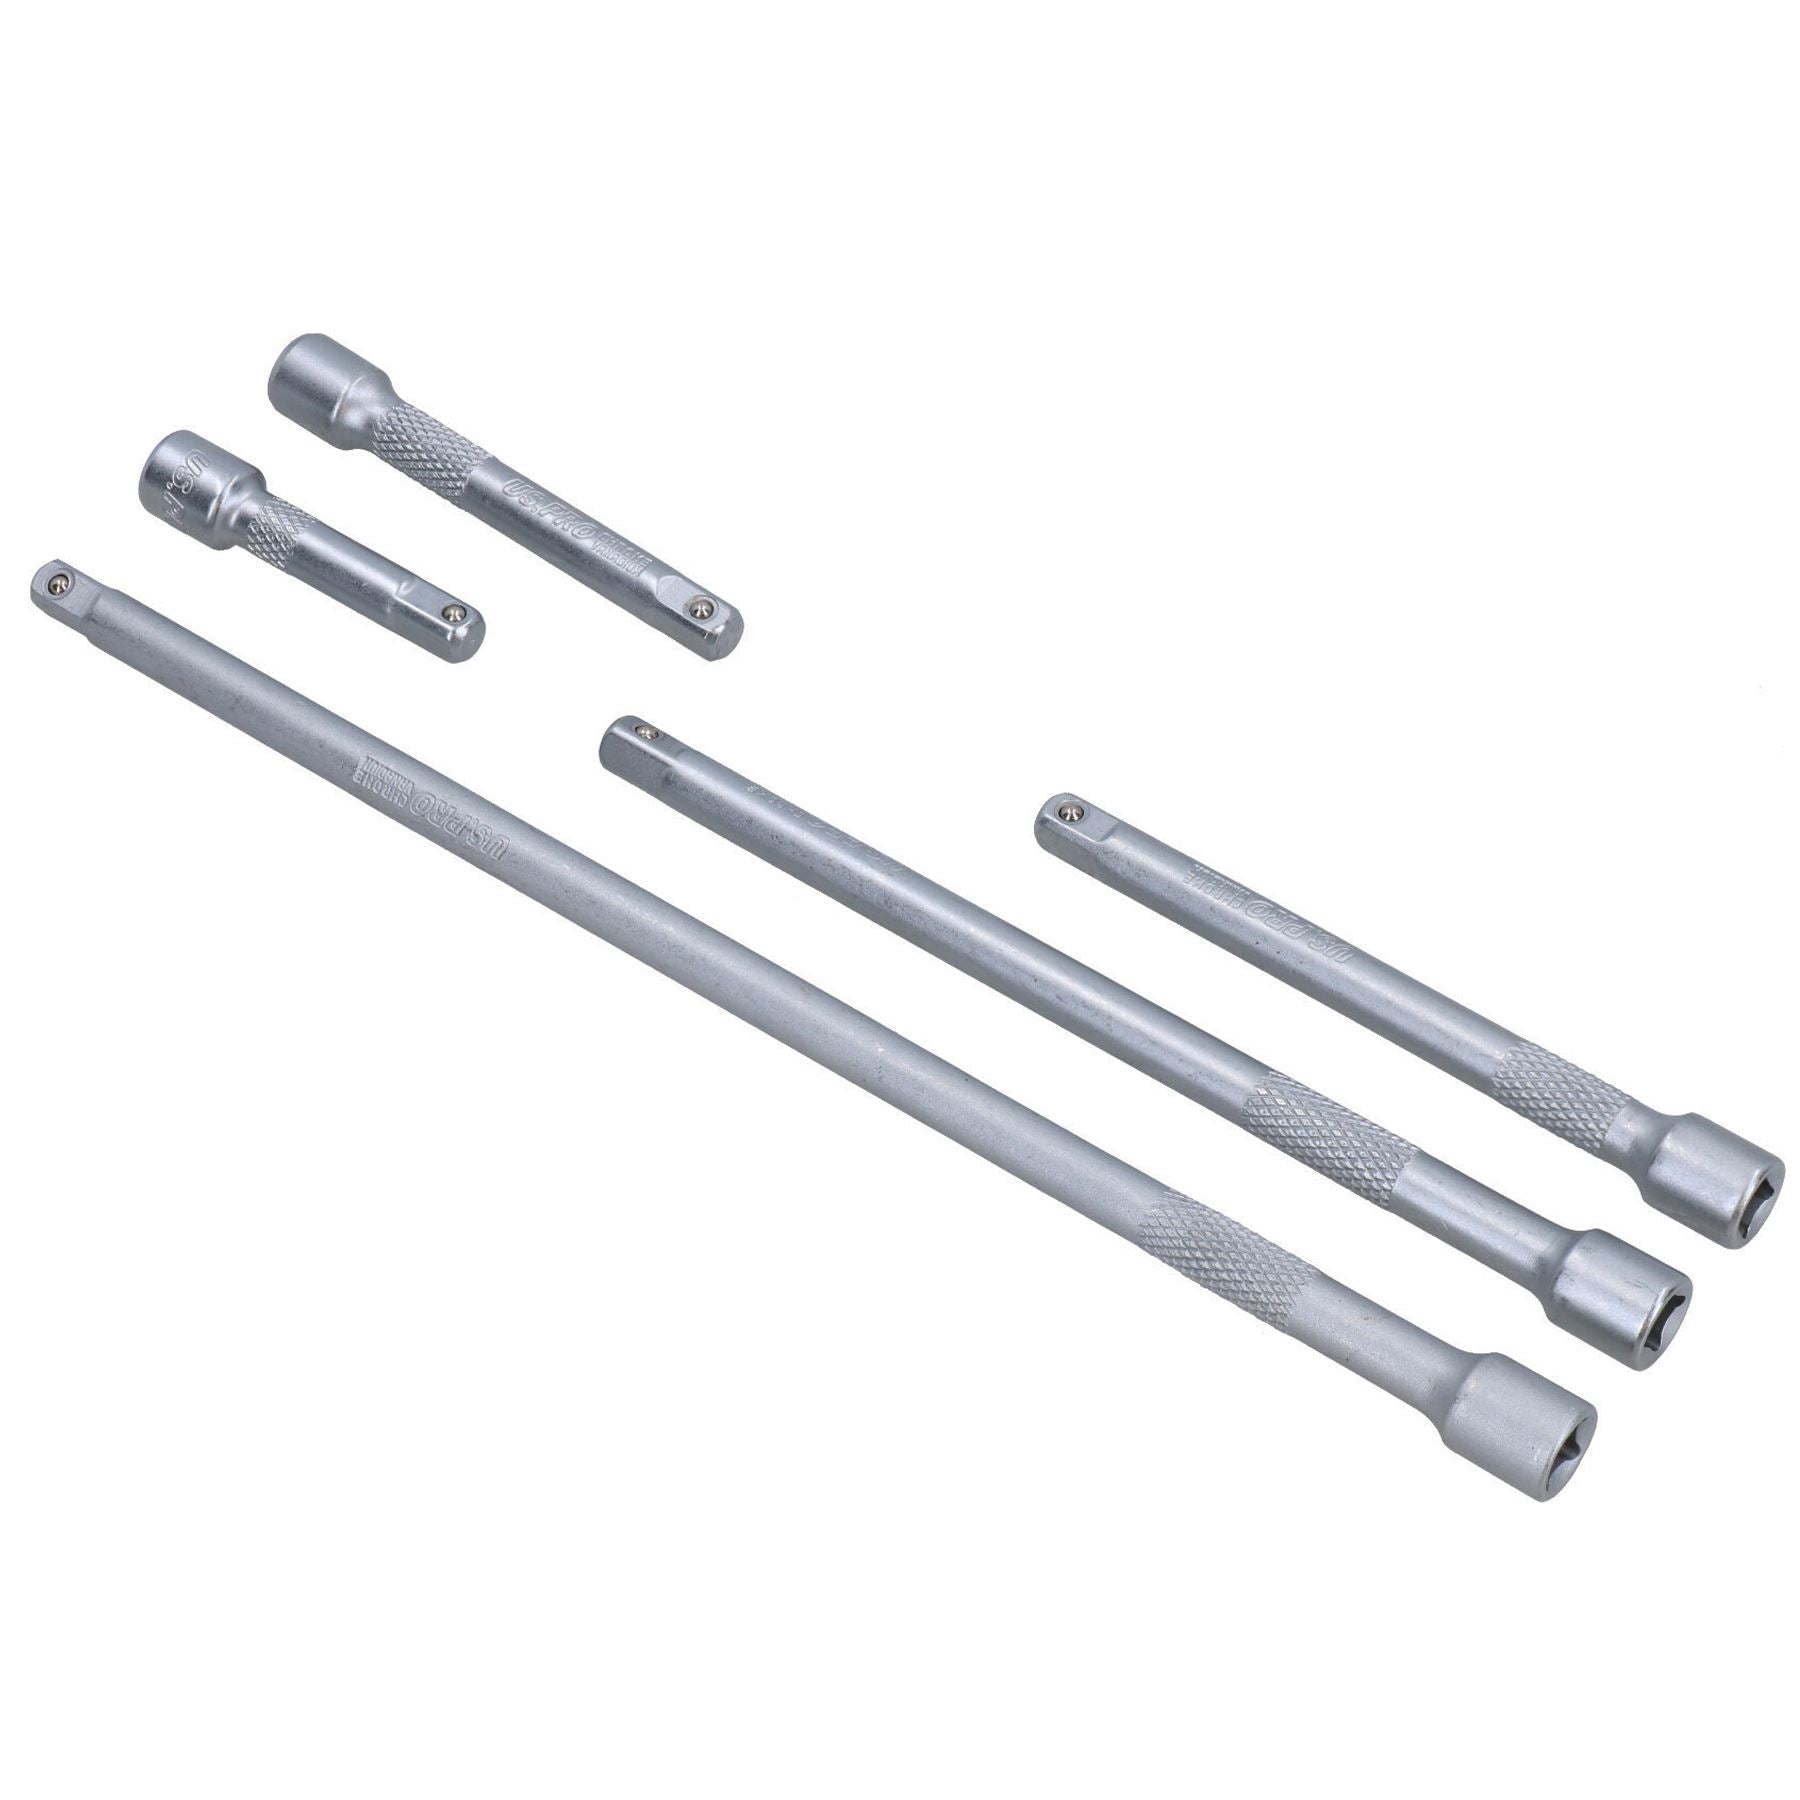 1/4" Drive Extension Bars